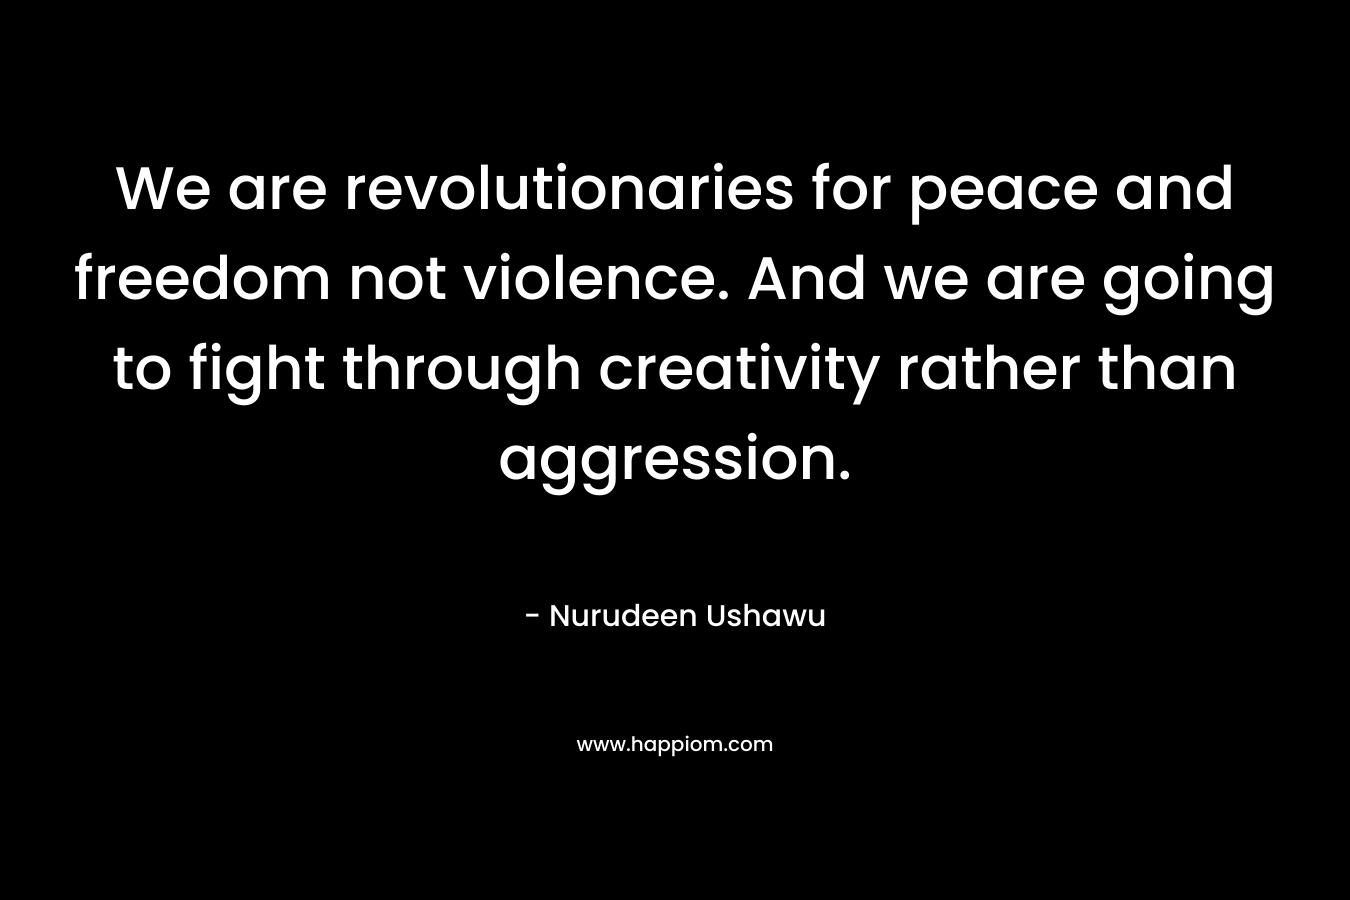 We are revolutionaries for peace and freedom not violence. And we are going to fight through creativity rather than aggression.